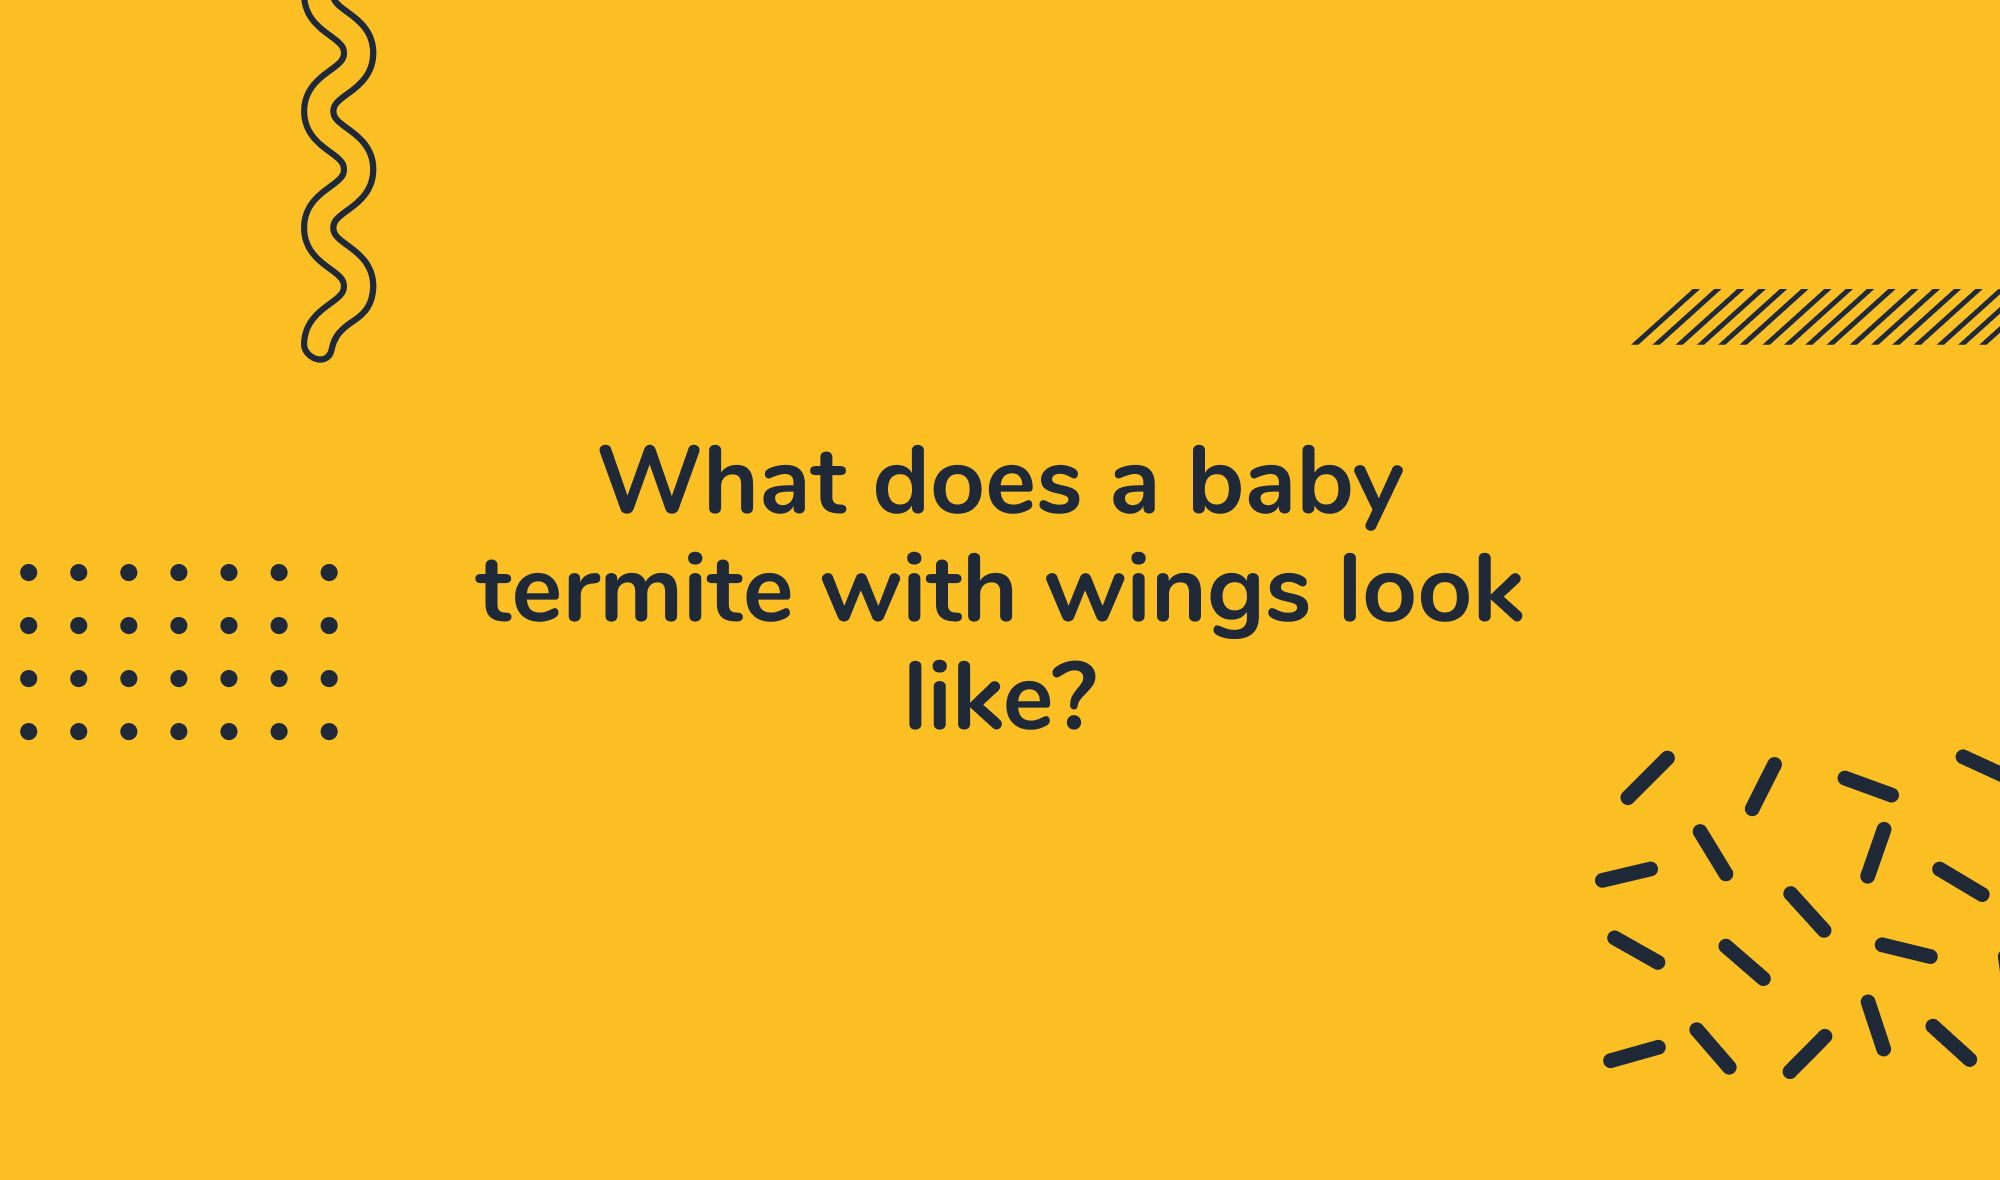 What does a baby termite with wings look like?